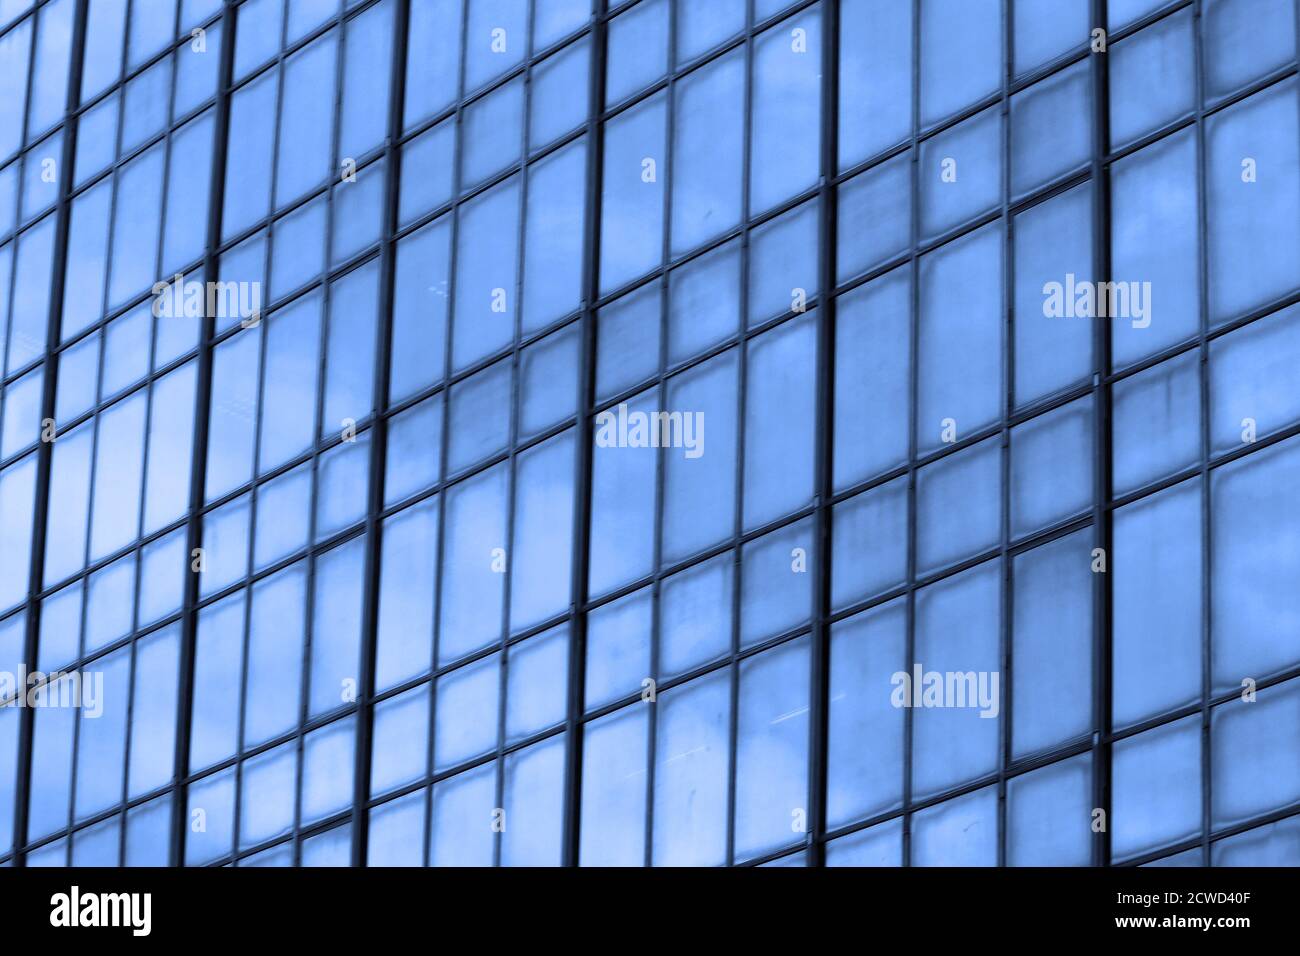 Blue glass building facade pattern texture background Stock Photo